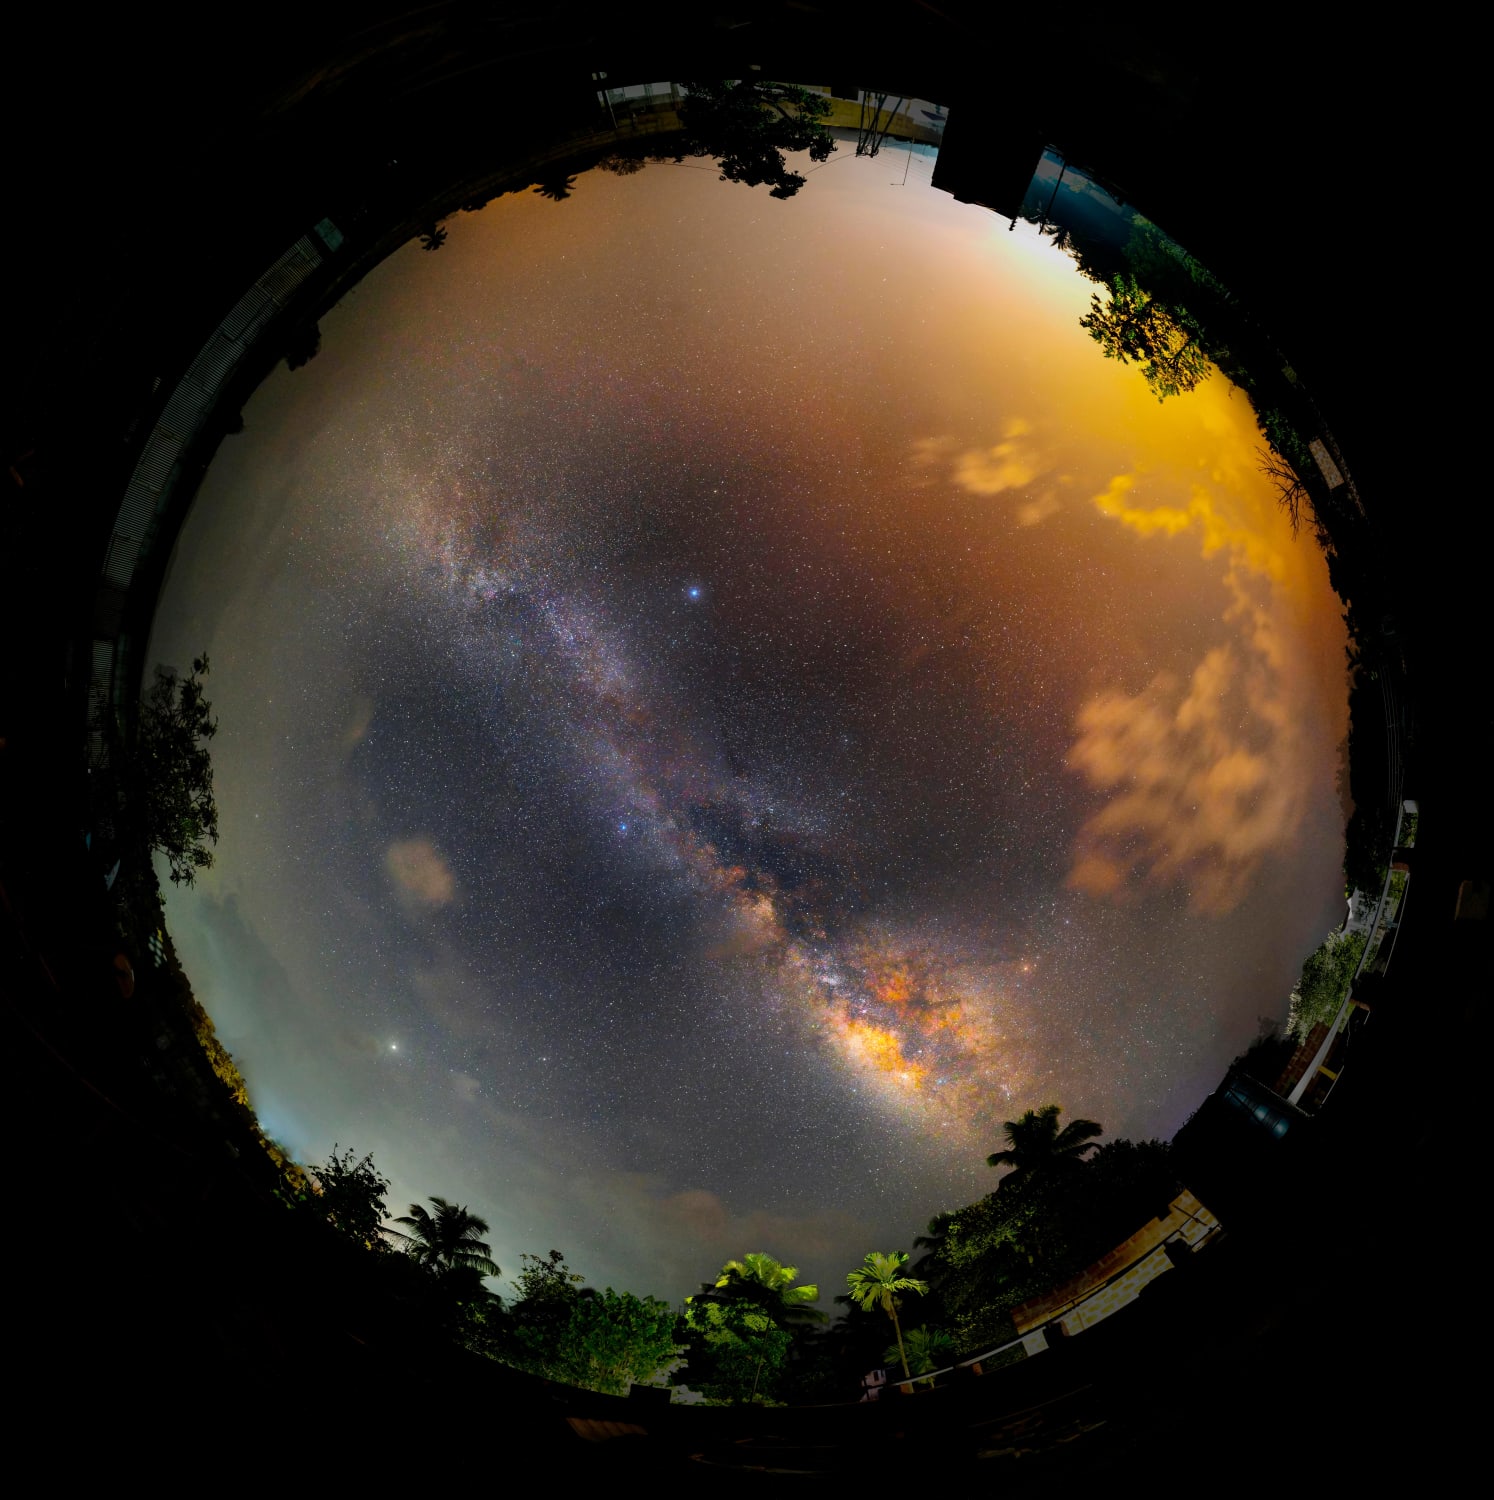 I captured a 360° Milkyway panorama last night. The full image is over 600 megapixels